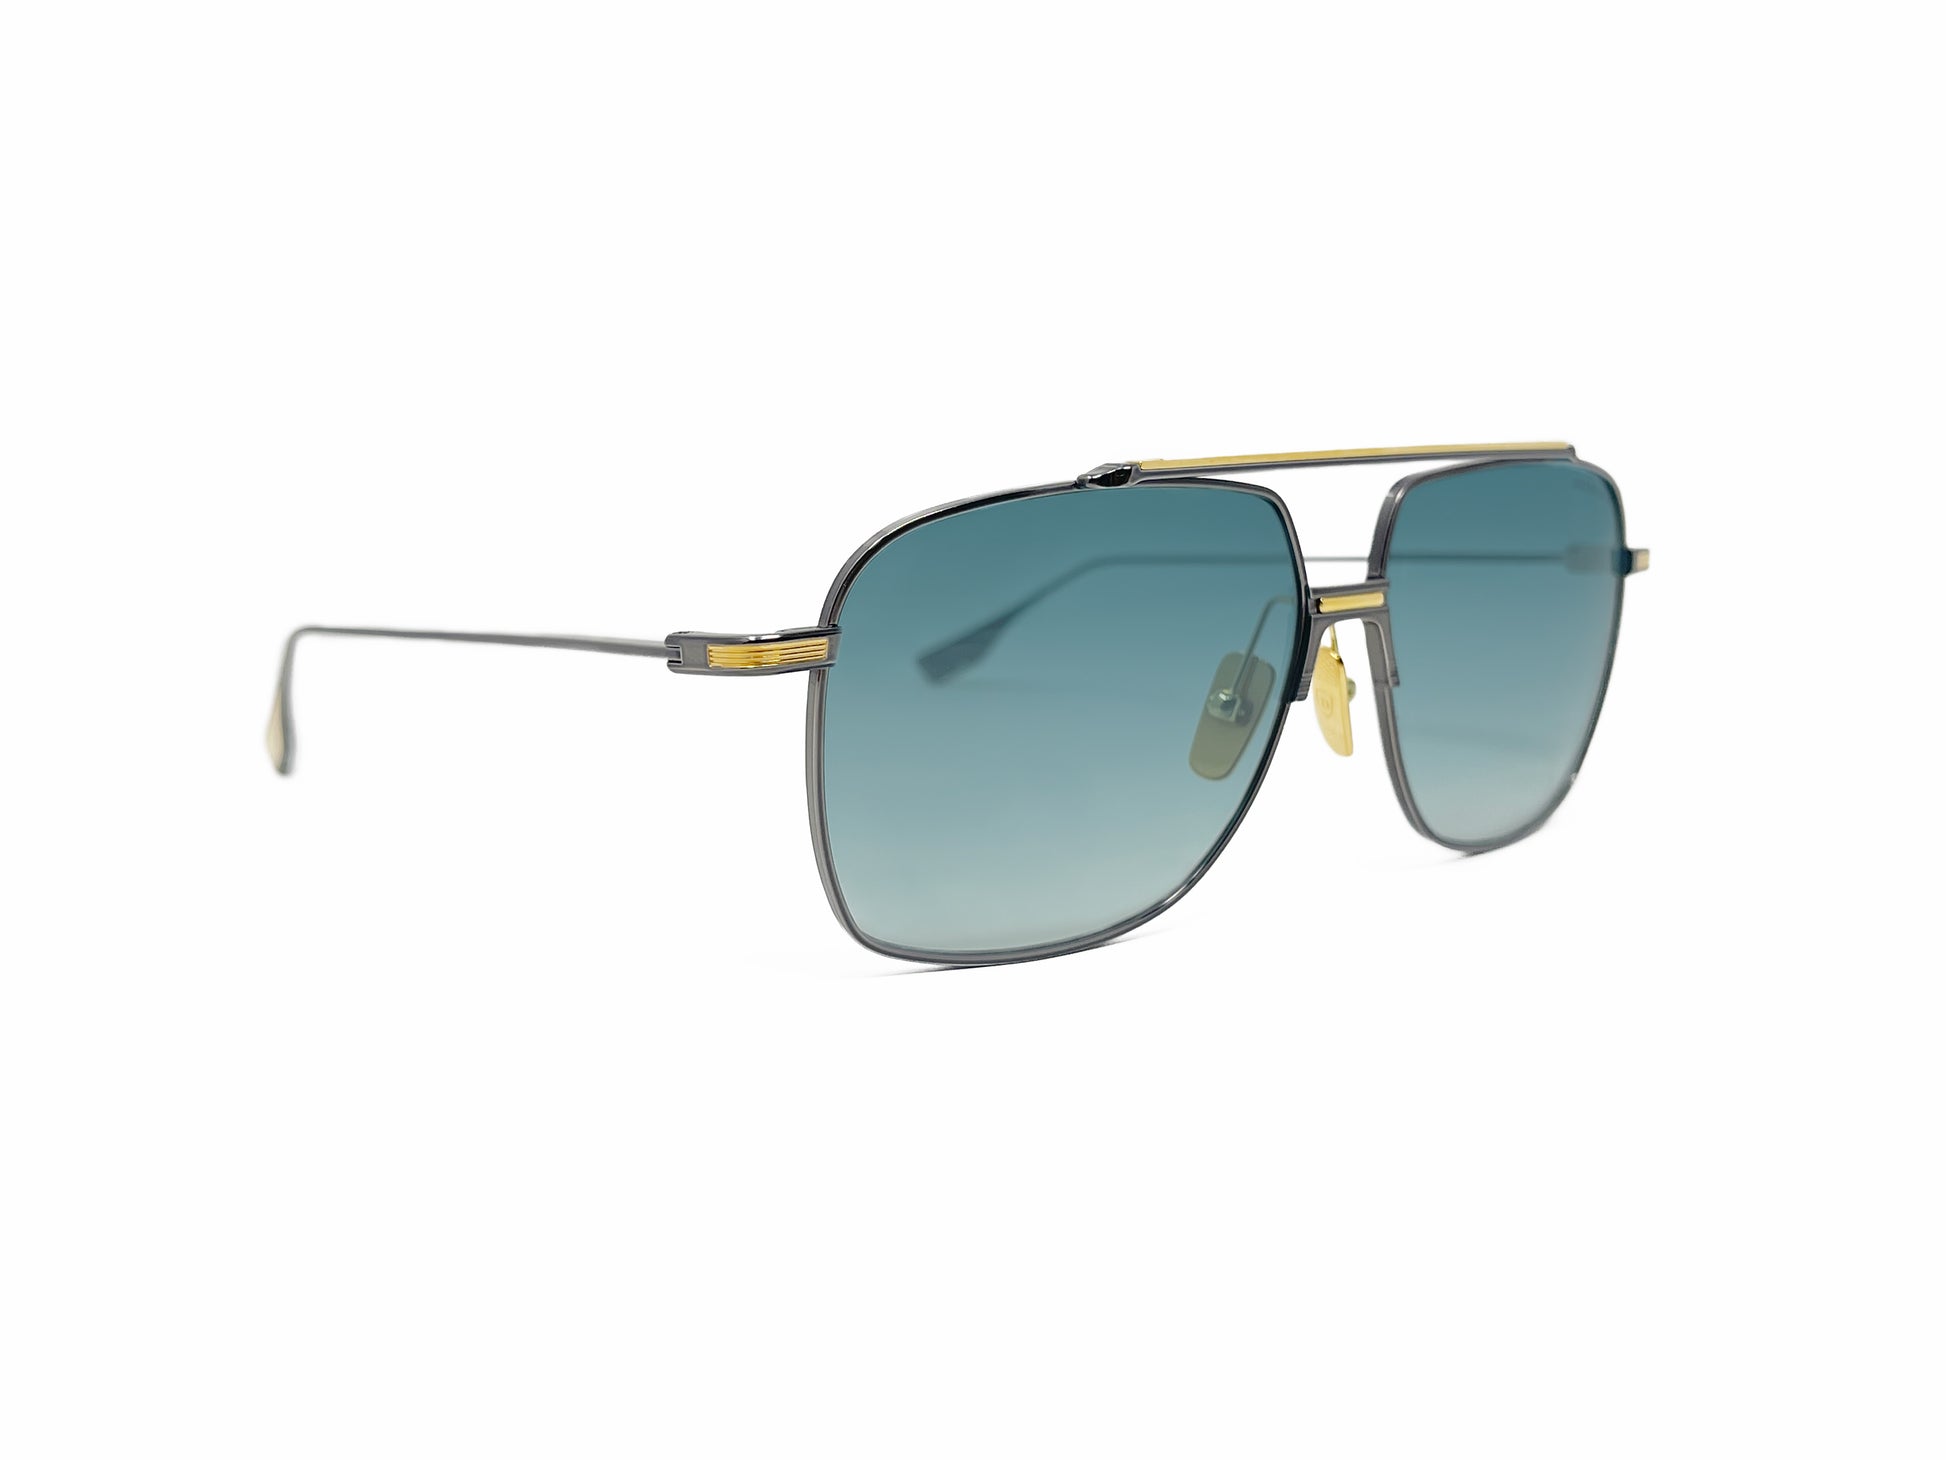 Dita squared aviator style sunglass with bar across top. Model: Alkamx. Color: 02 - Gunmetal with gold accents and blue gradient lenses. Side view.